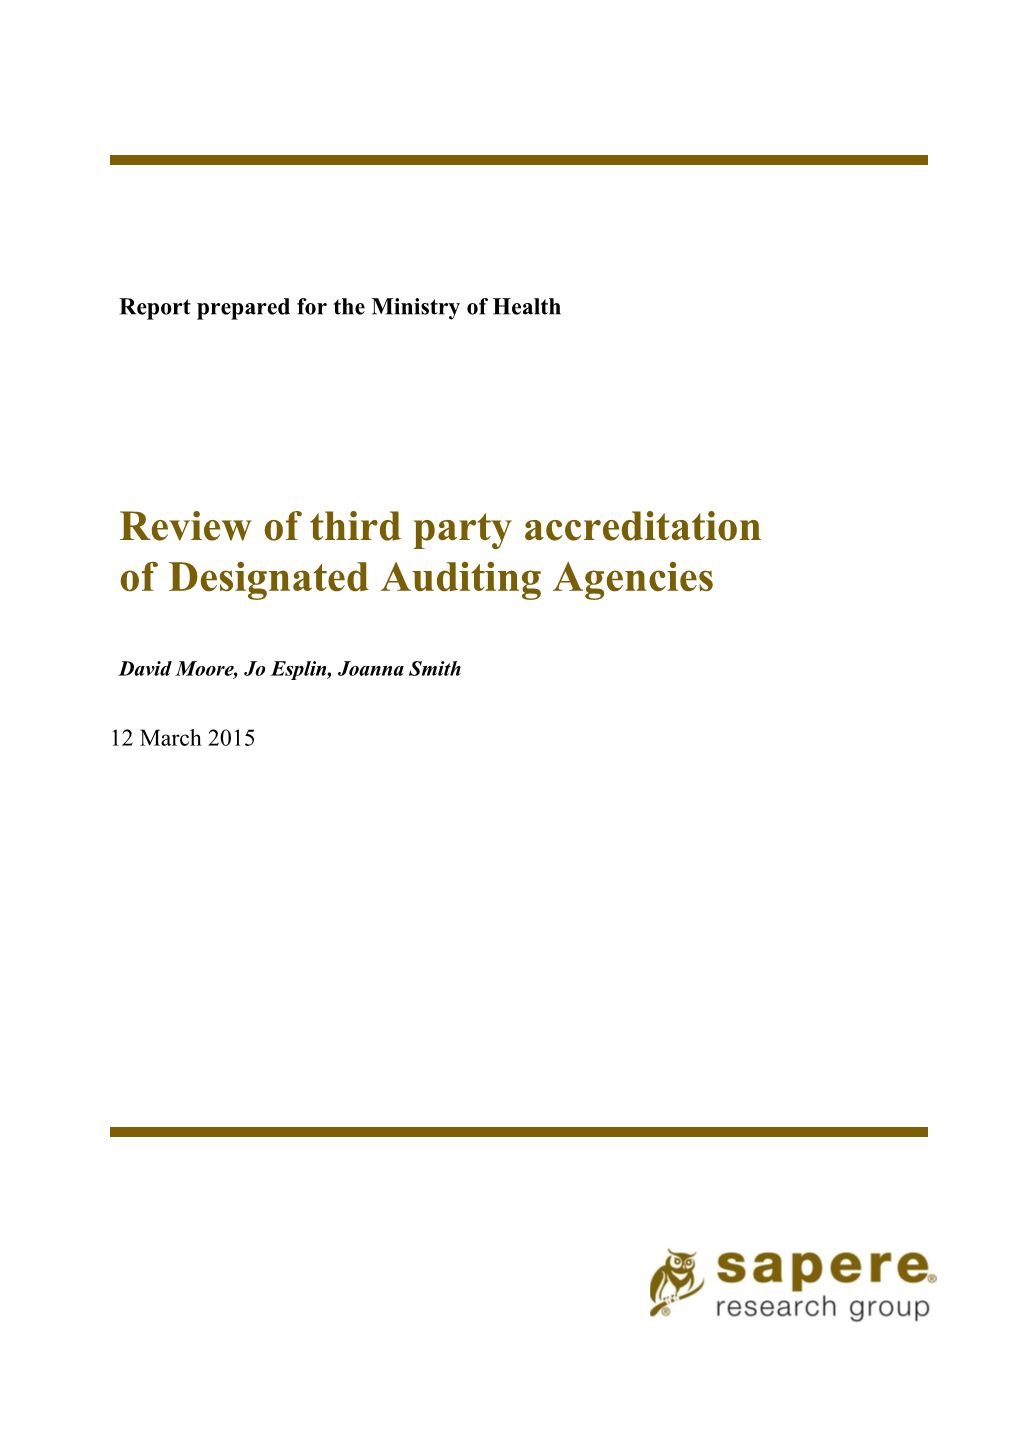 Review of Third Party Accreditation of Designated Auditing Agencies